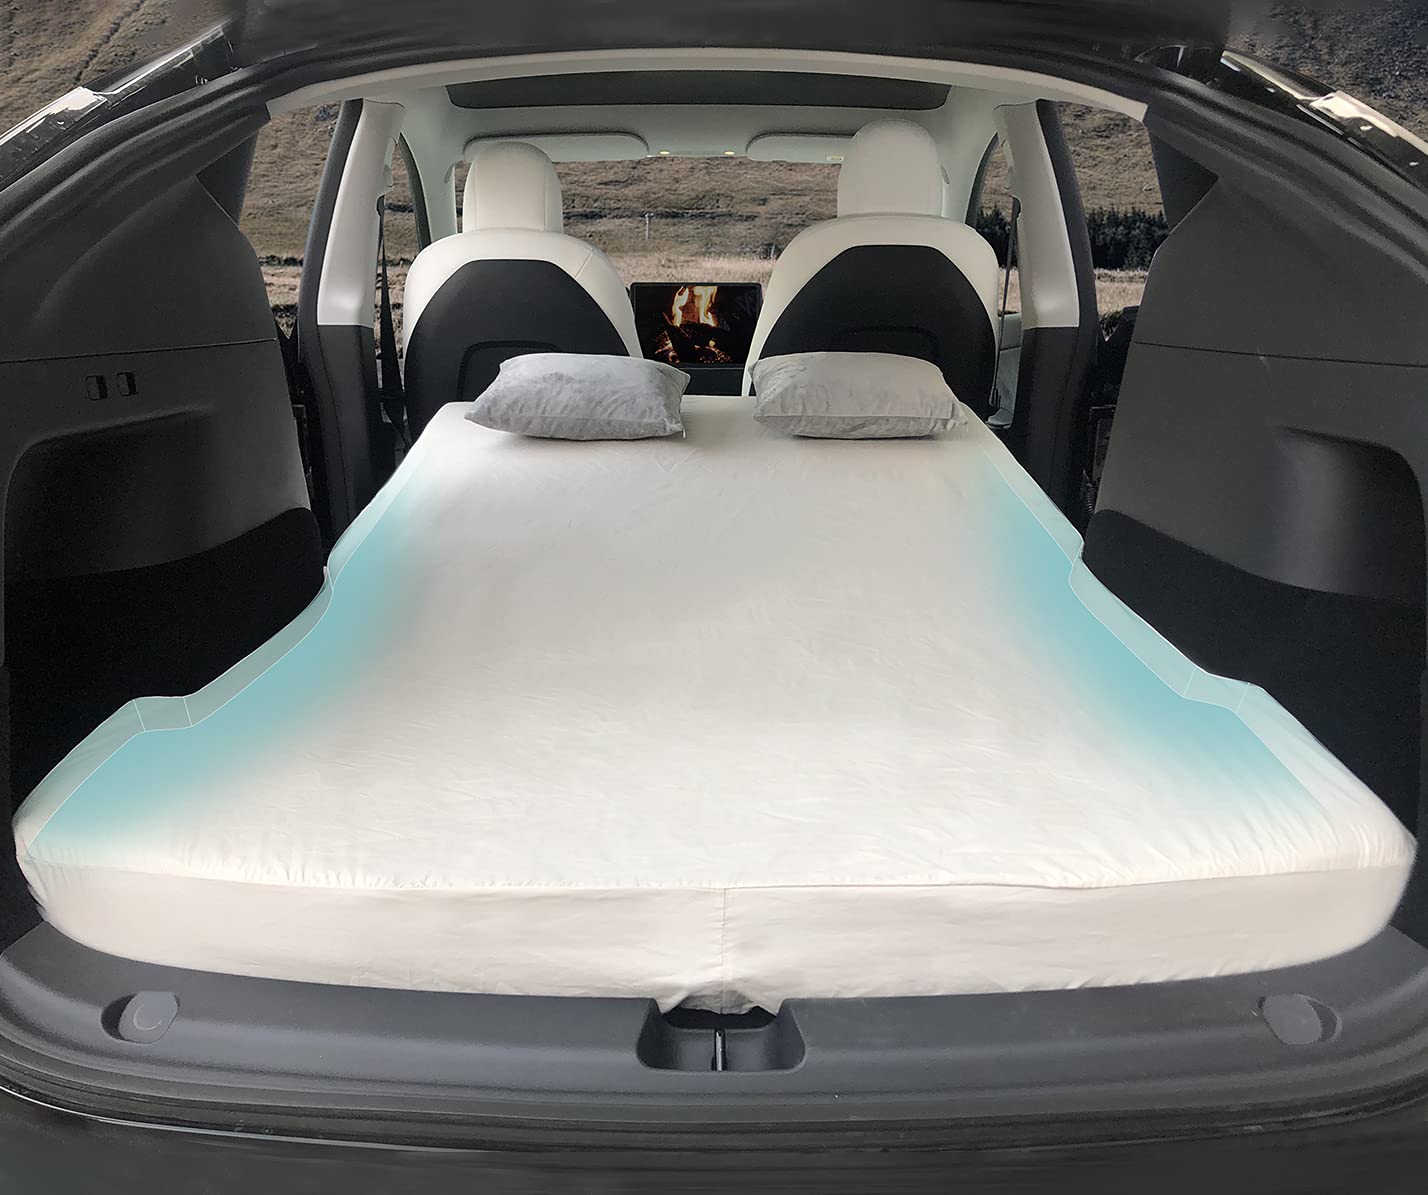 TESCAMP Camping Mattress CertiPUR Memory Foam Car Mattress, Storage Bag & Sheet Provided, for Tesla Model 3, Y, Portable, Foldable, Space Saver, in Car Sleeping, Twin Size